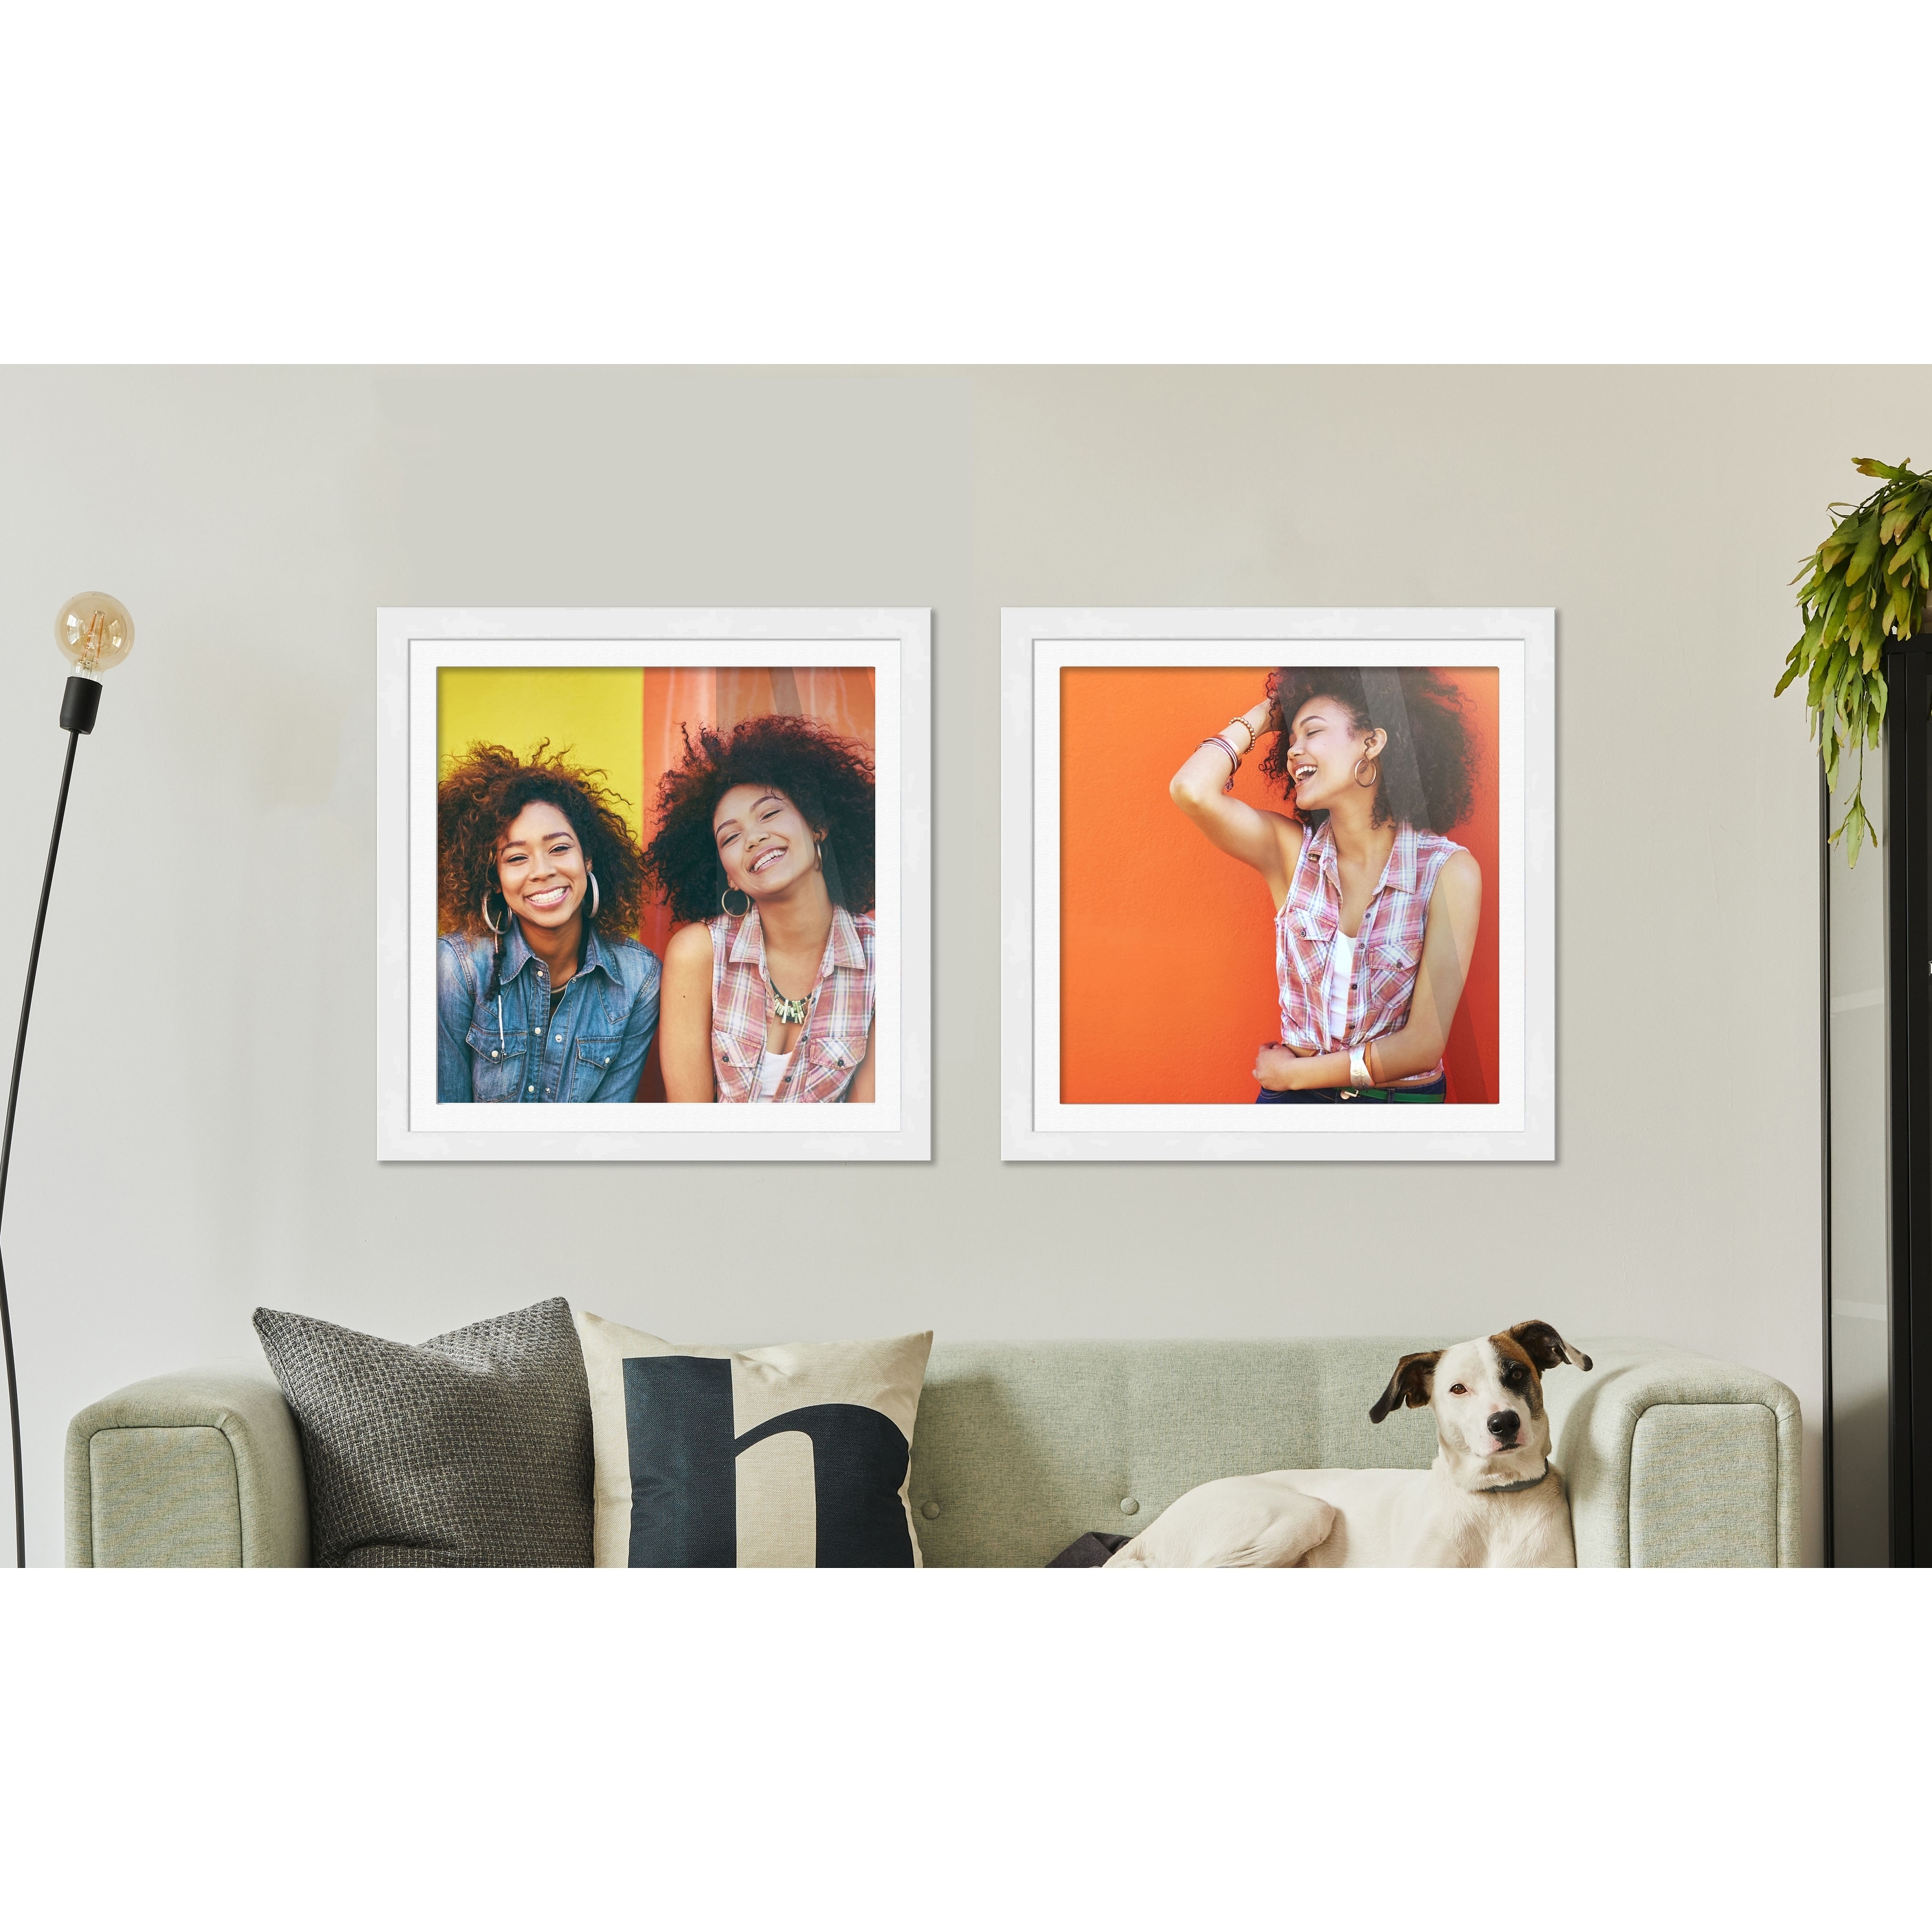 30x30 Frame with Mat - Brown 34x34 Frame Wood Made to Display Print or  Poster Measuring 30 x 30 Inches with White Photo Mat - Bed Bath & Beyond -  38578065